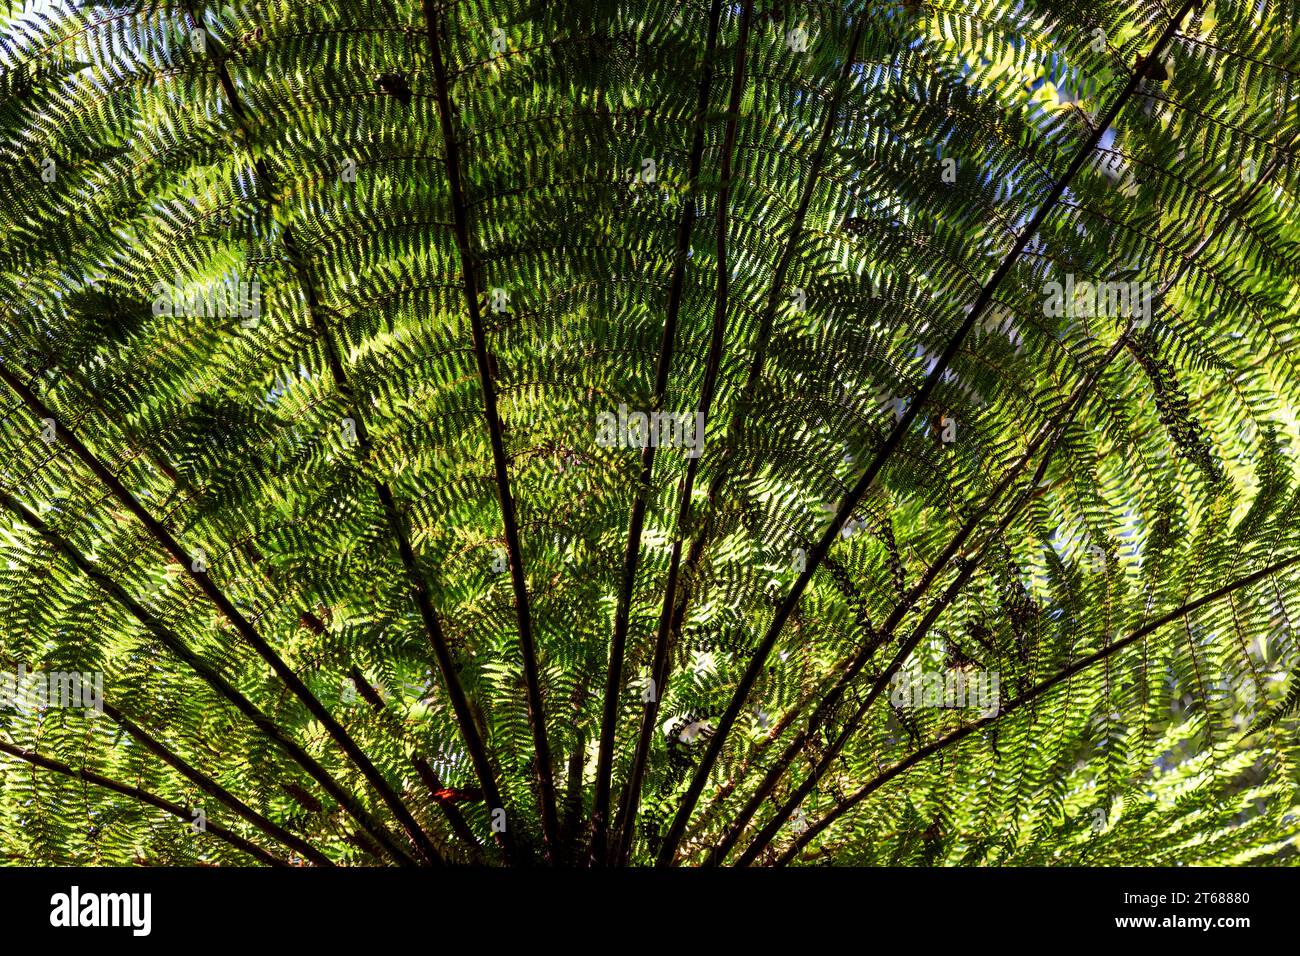 The tree ferns are arborescent (tree-like) ferns that grow with a trunk elevating the fronds above ground level, making them trees. Many extant tree f Stock Photo